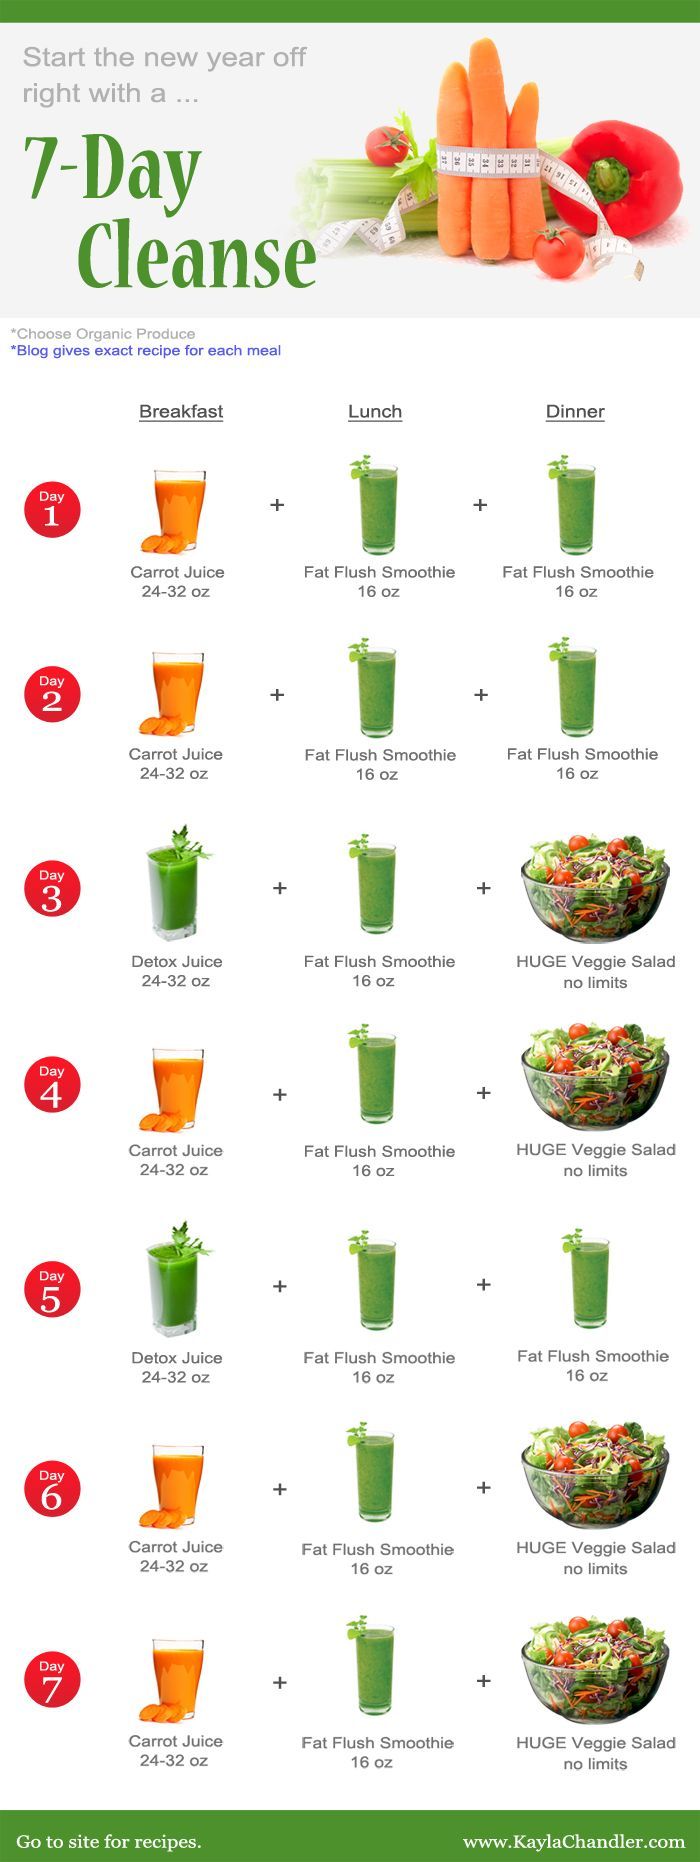 Will be doing this after the holidays! 7-Day Detox Cleanse with recipes for each day.